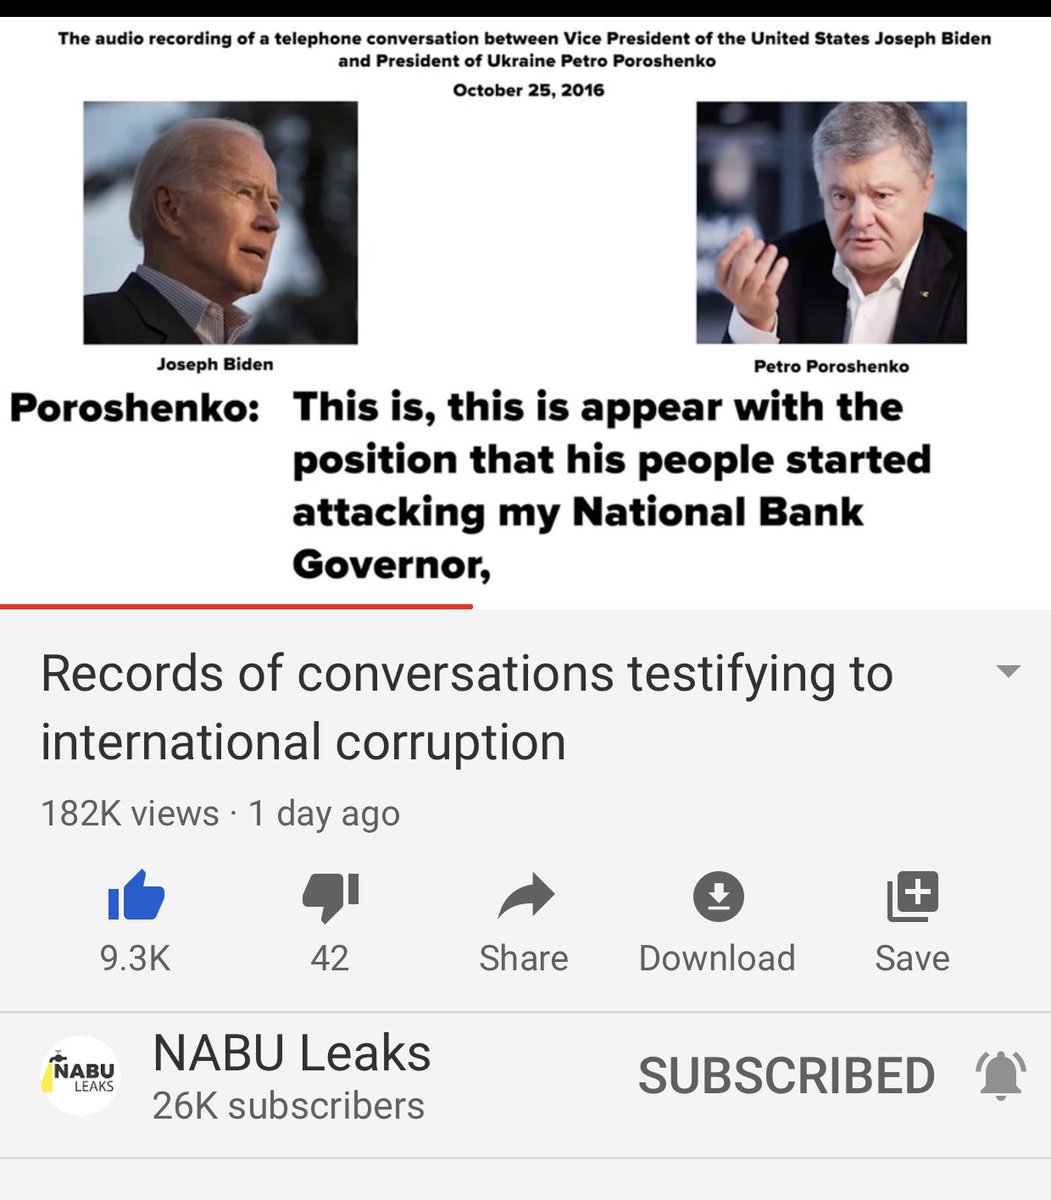 So Poroshenko tells Biden that things weren’t going well with Privat Bank aka the Bank OBiden but he has a new insider that he trusts will protect them